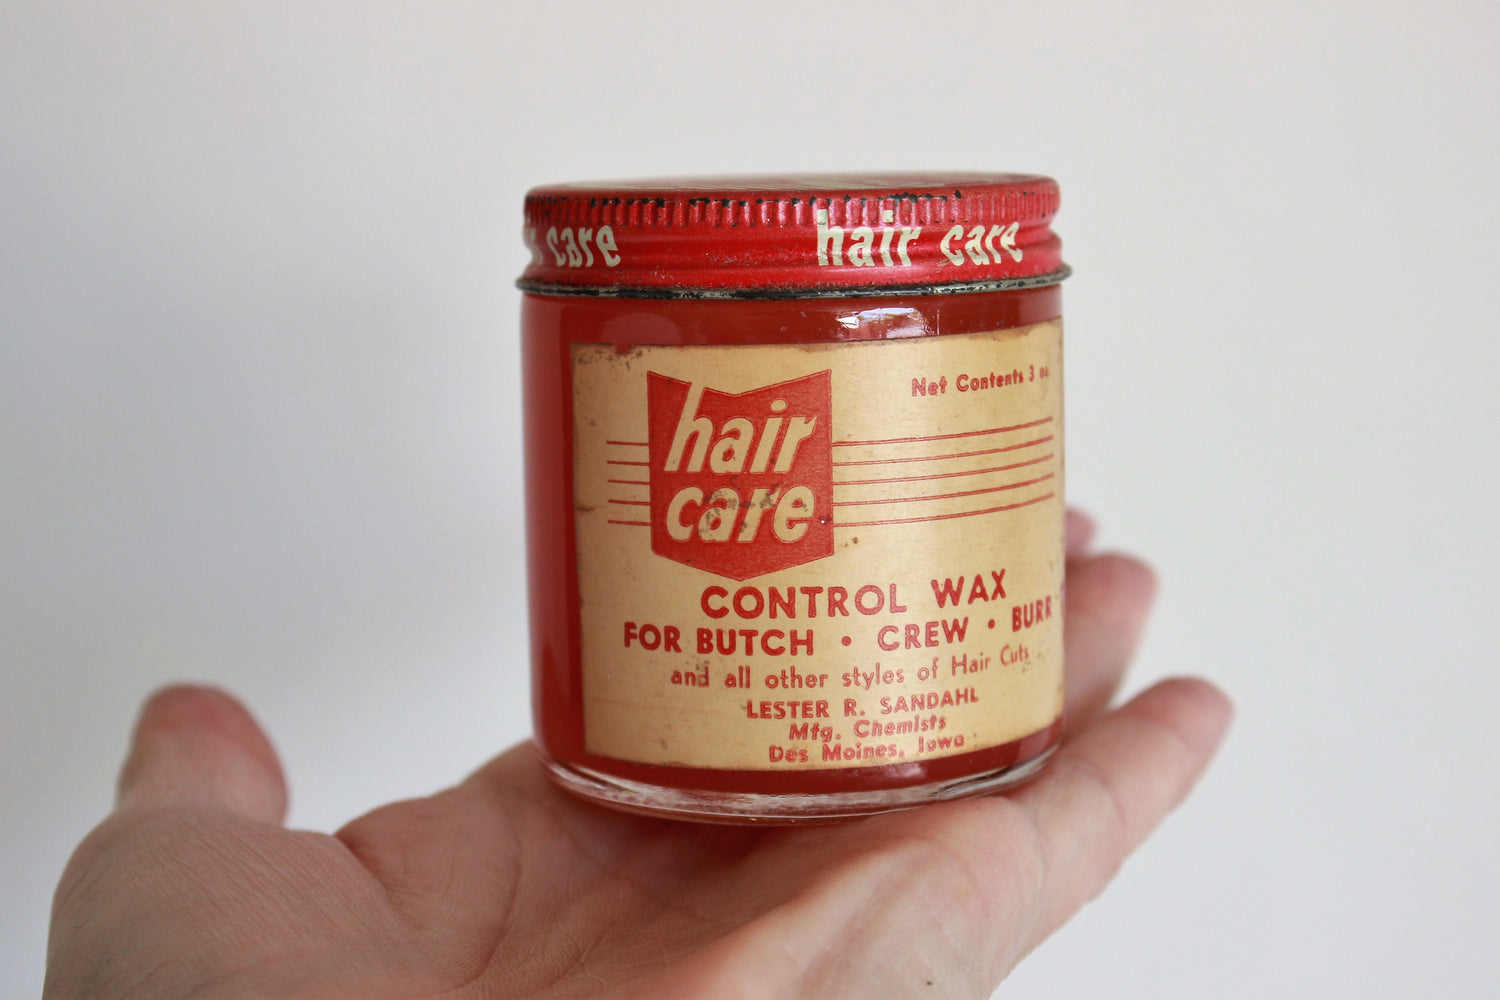 Vintage 1950s Hair Care Styling Wax